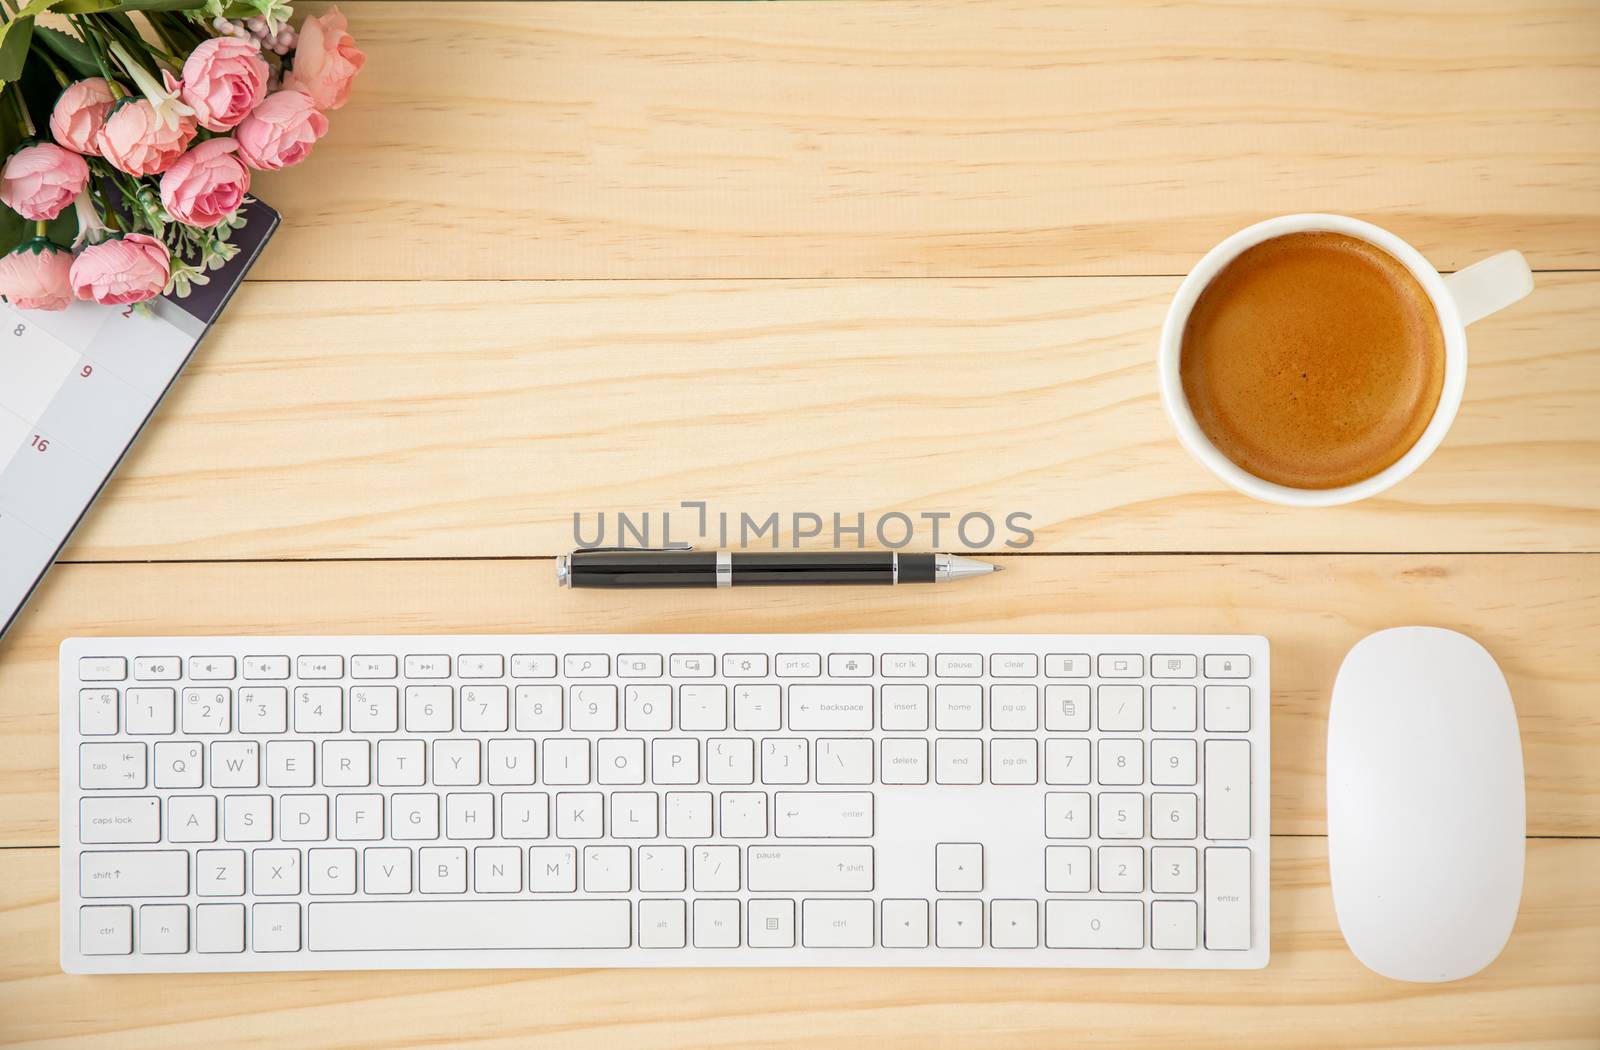 A minimal business workspace with white wireless computer mouse and keyboard with coffee in a white ceramic cup.